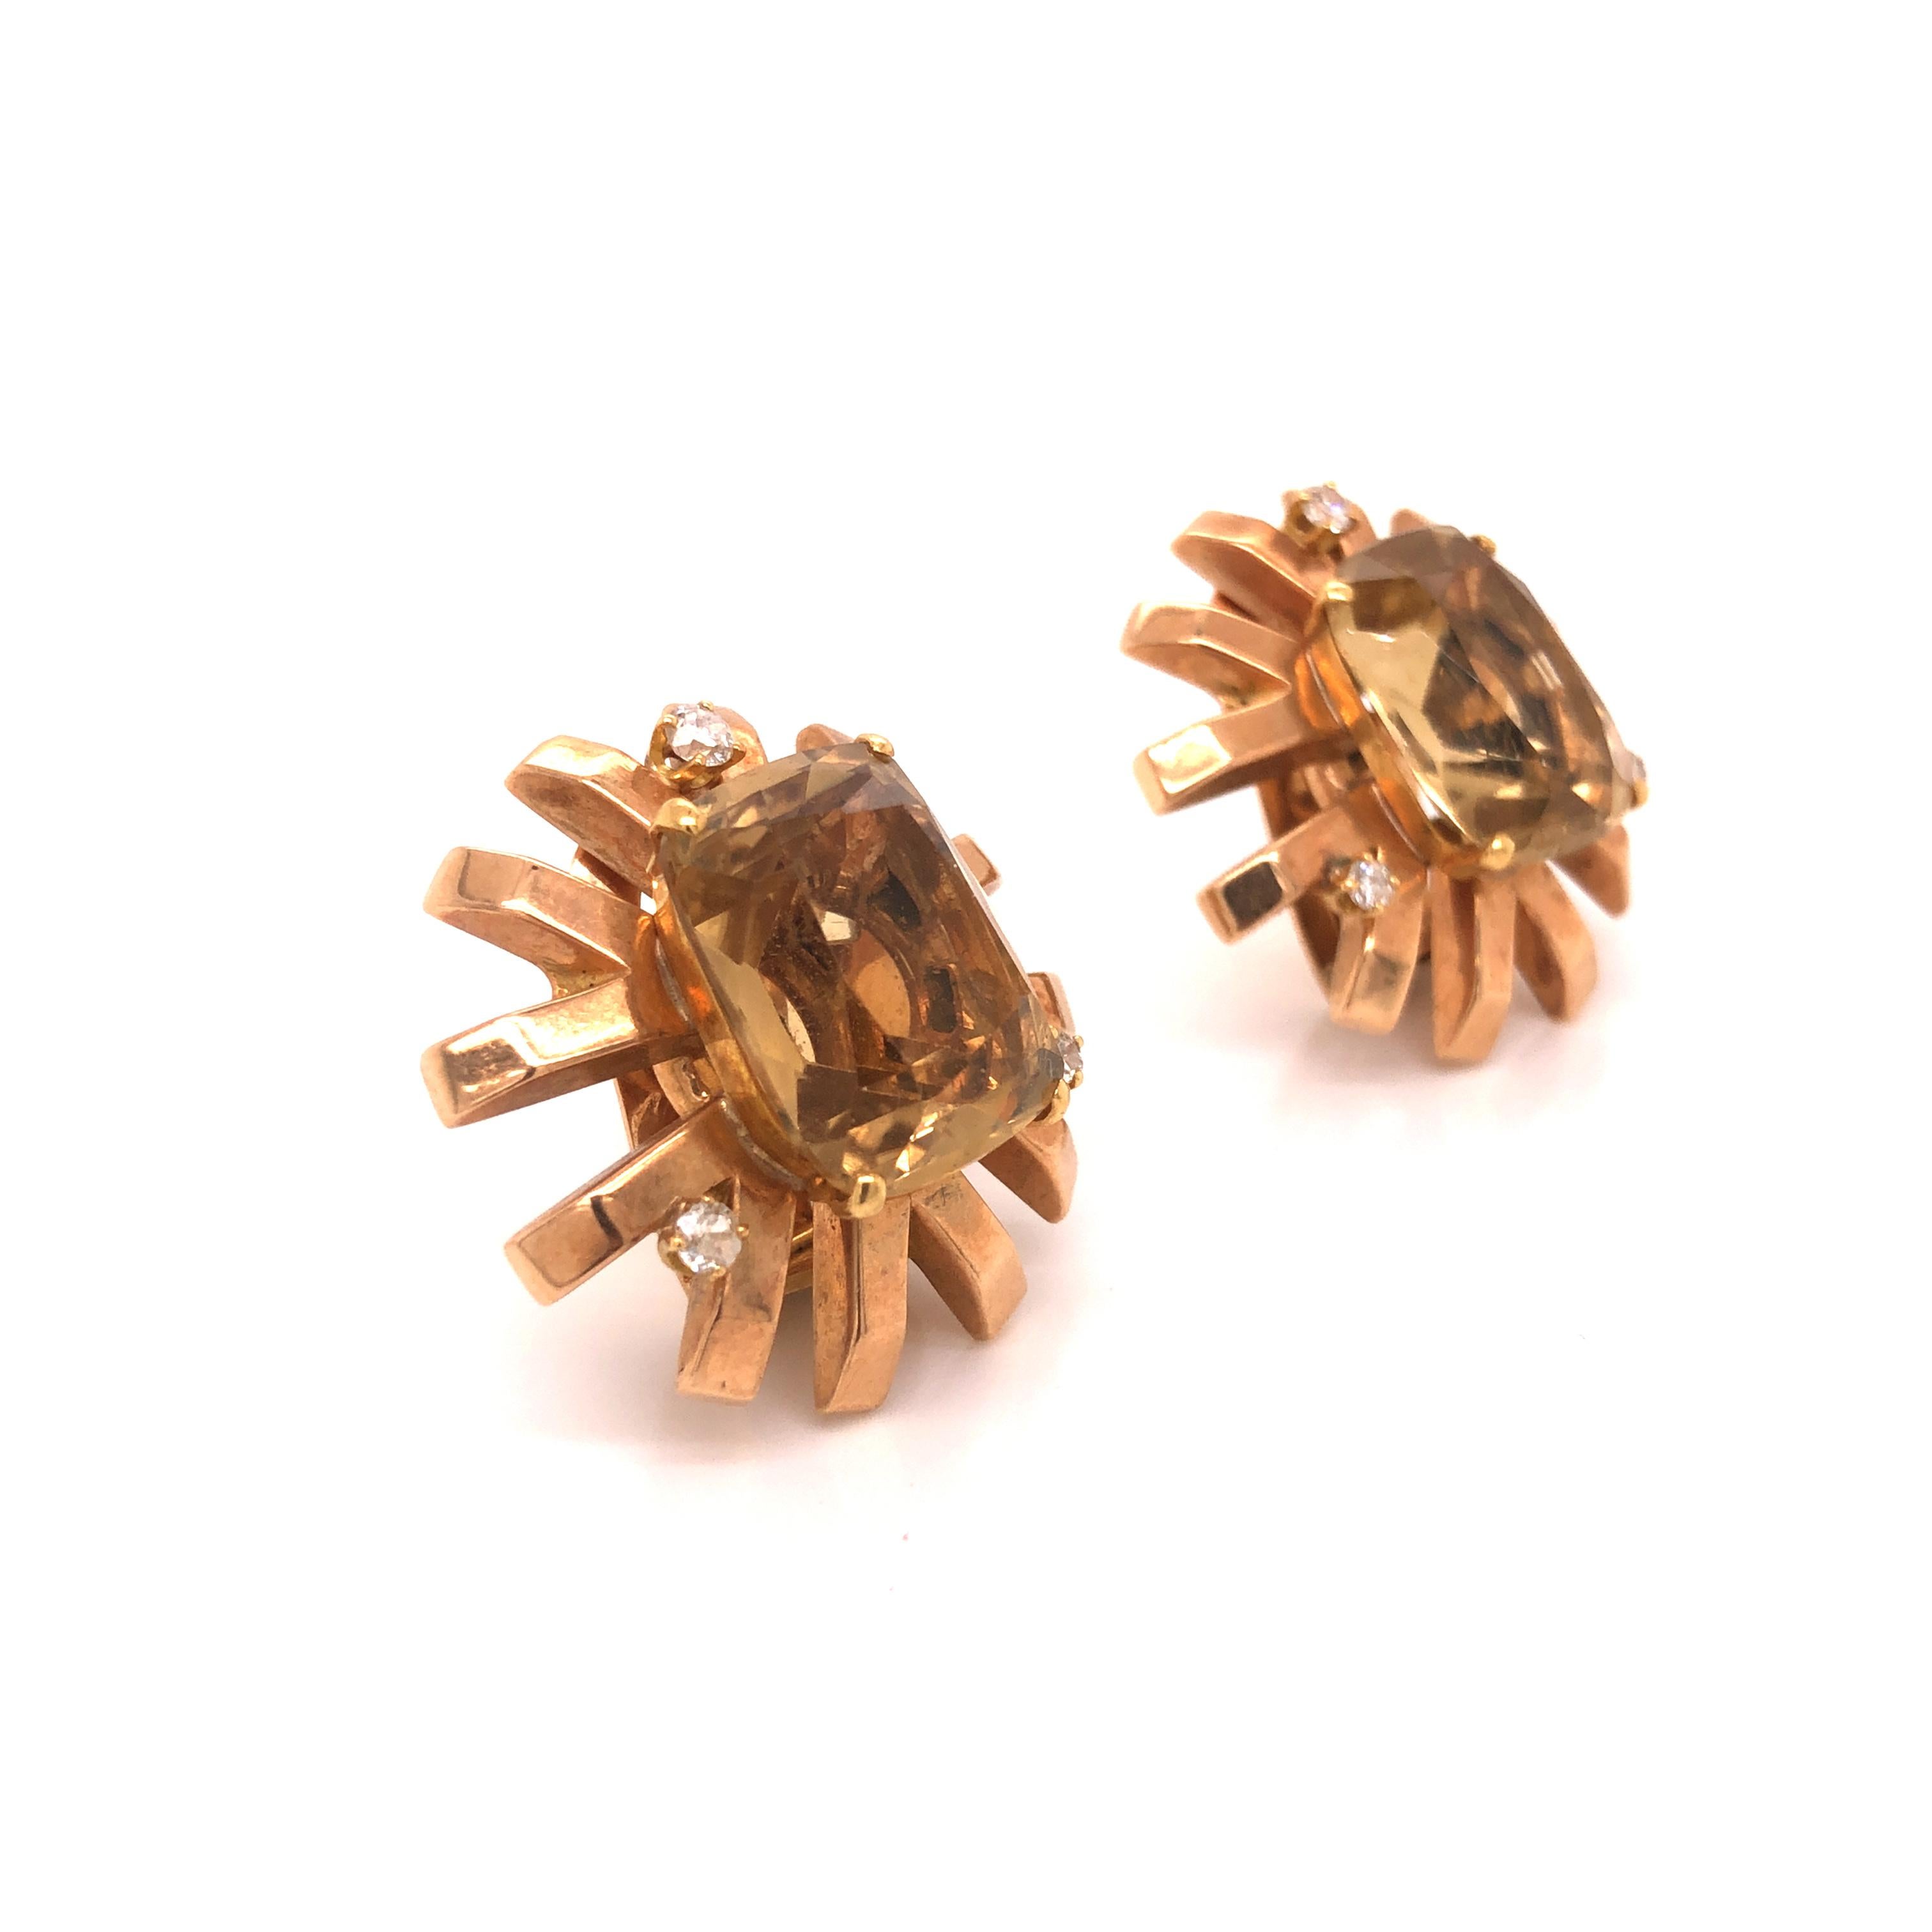 A vintage pair of 14K rose gold earrings featuring 2 cushion-cut citrine measuring 16.81 x 12.73 x 9.01 mm and weighing a total of approximately 21.70 carats, enhanced by full-cut diamonds weighing a total of approximately .30 carat, G-H-I color, I